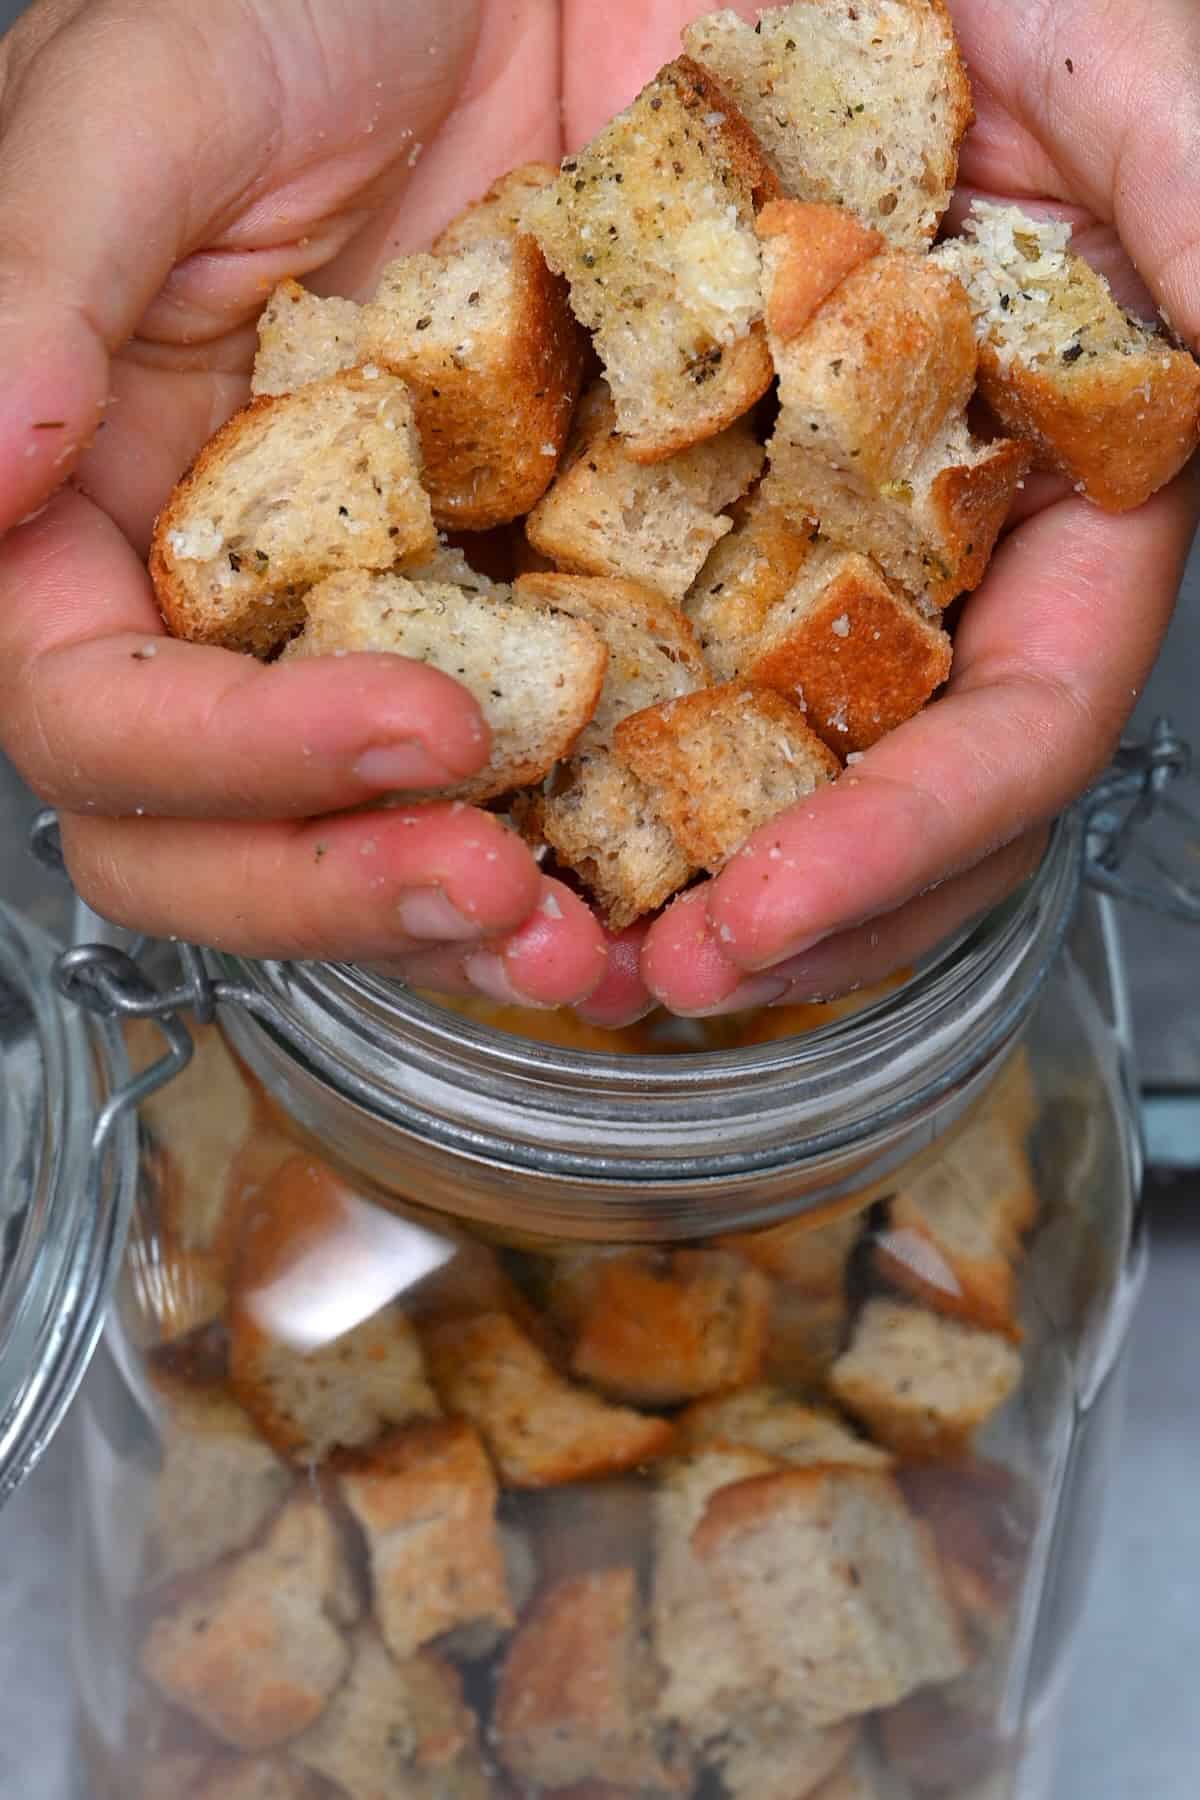 Placing homemade croutons in a jar